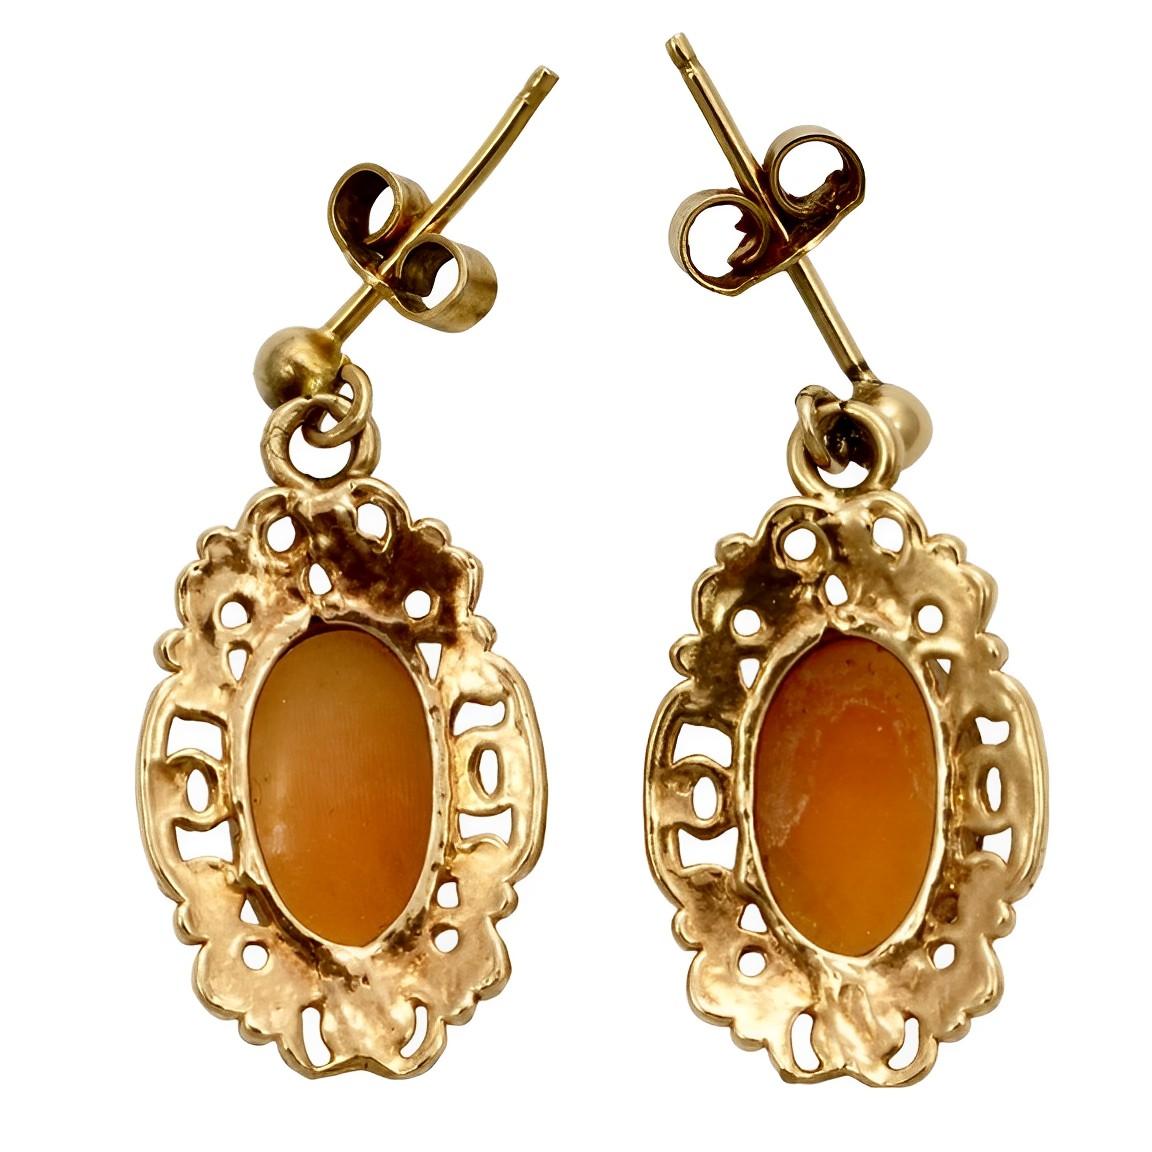 Beautiful 9K rose gold carved cameo drop earrings, with an ornate surround. The tops are yellow gold, they have butterfly backs. The backs are similar but do not match. Measuring length 2.4 cm / .94 inch by maximum width 1.2 cm / .47 inch.

This is